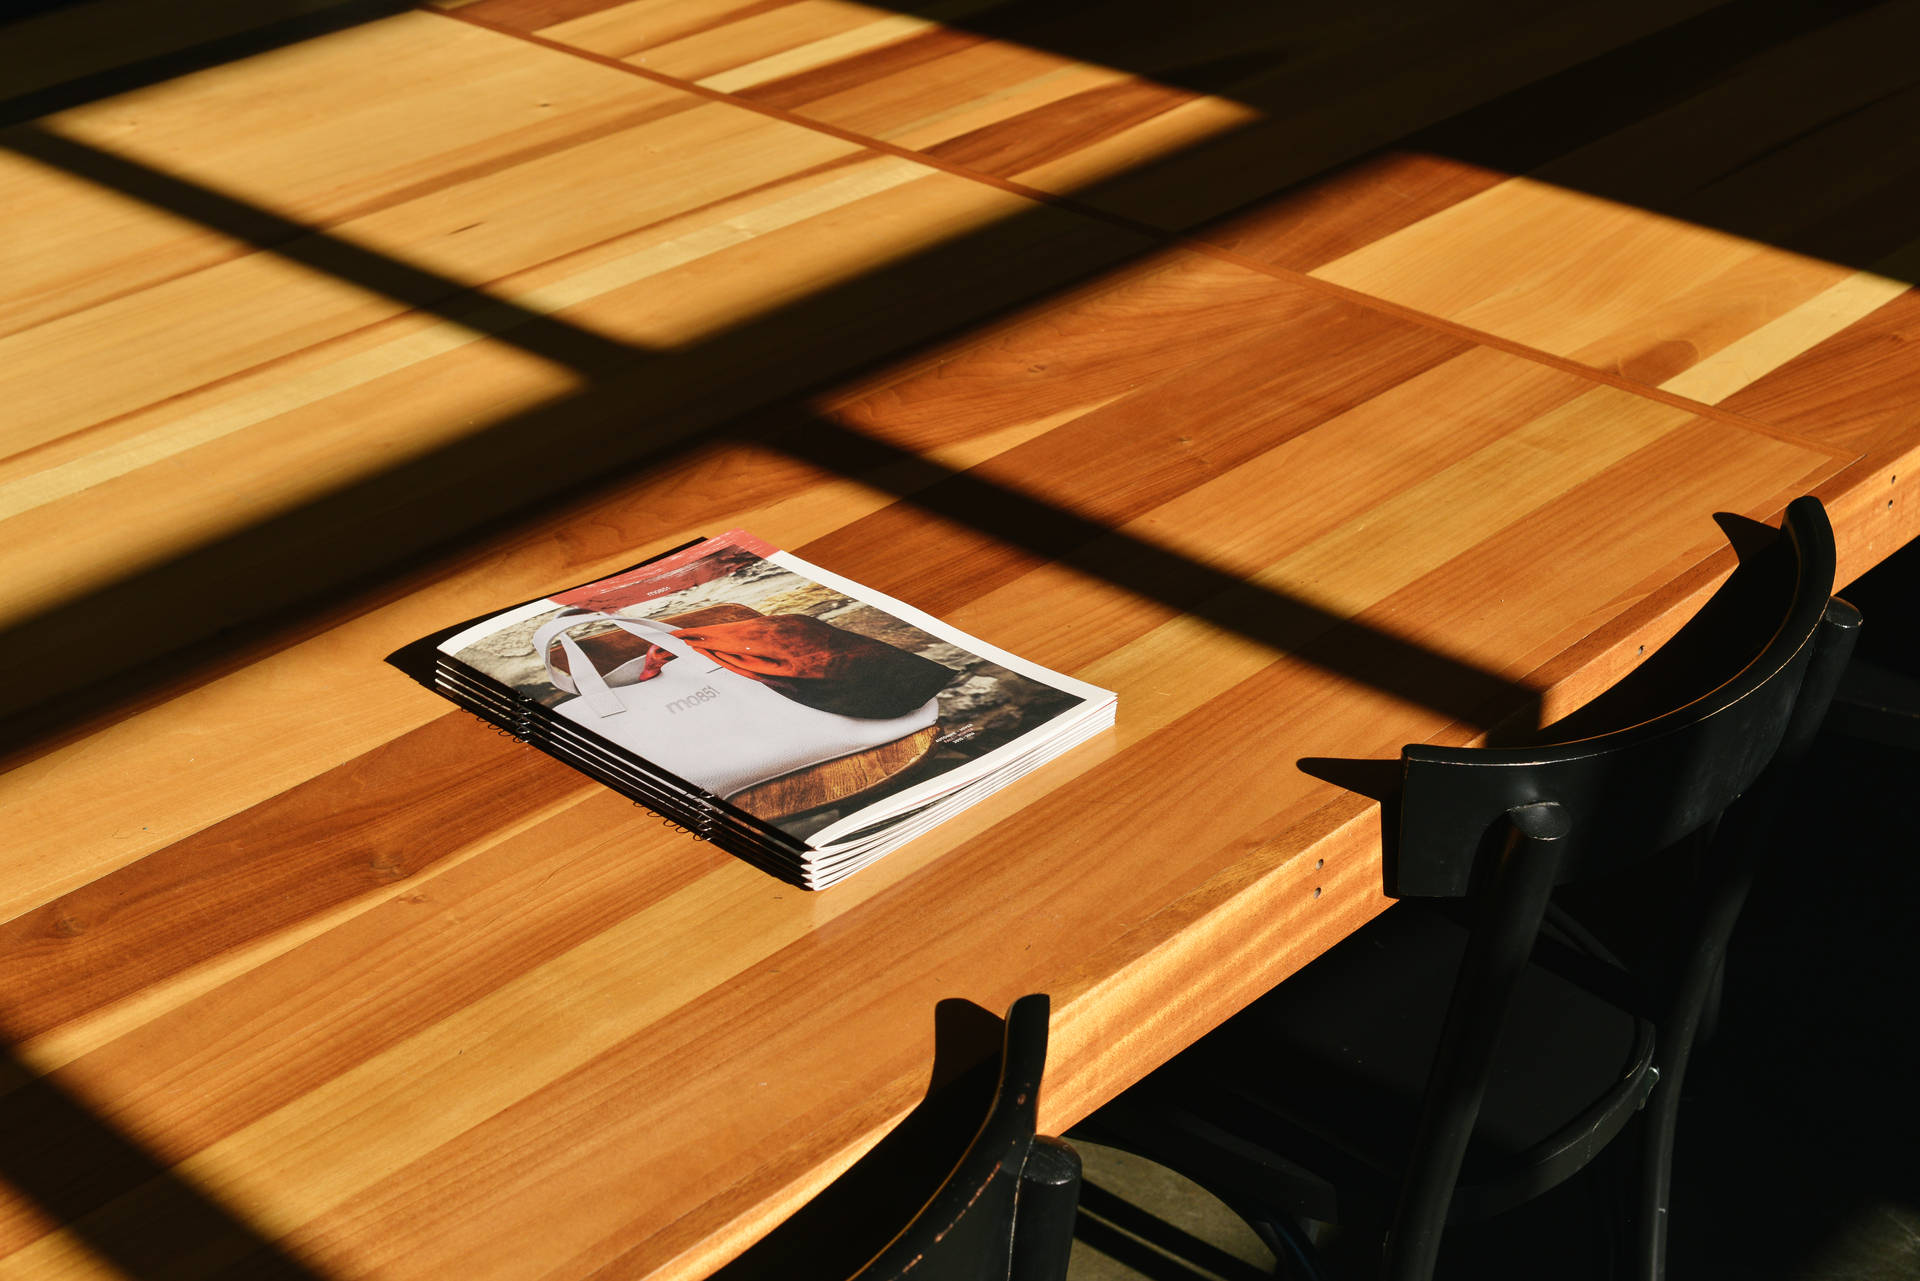 Magazine Placed On Wooden Table